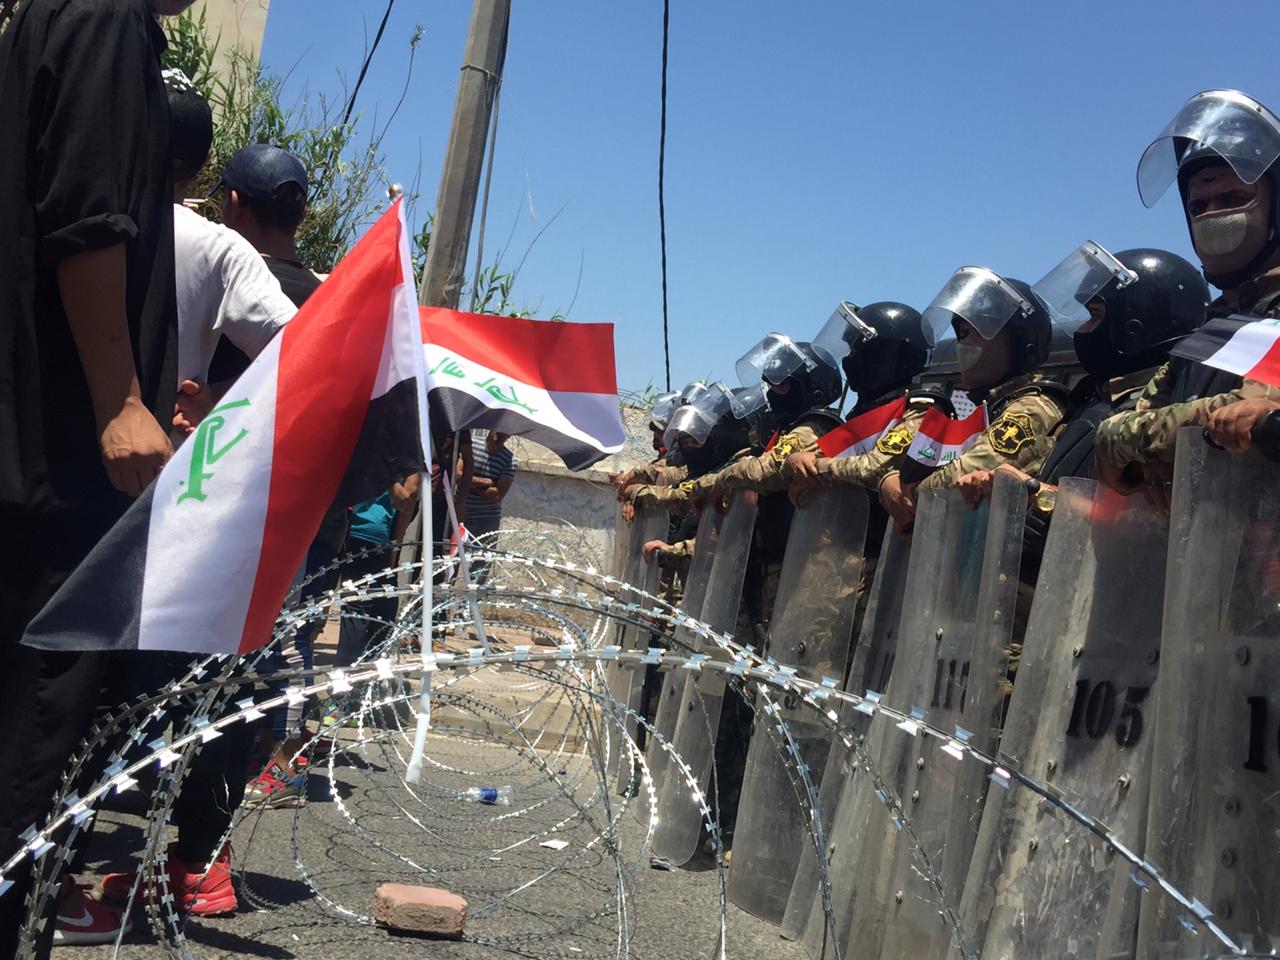 Iraqi security force prevent protesters coming close to a governmental building in Basra (Azhar Al-Rubaie)